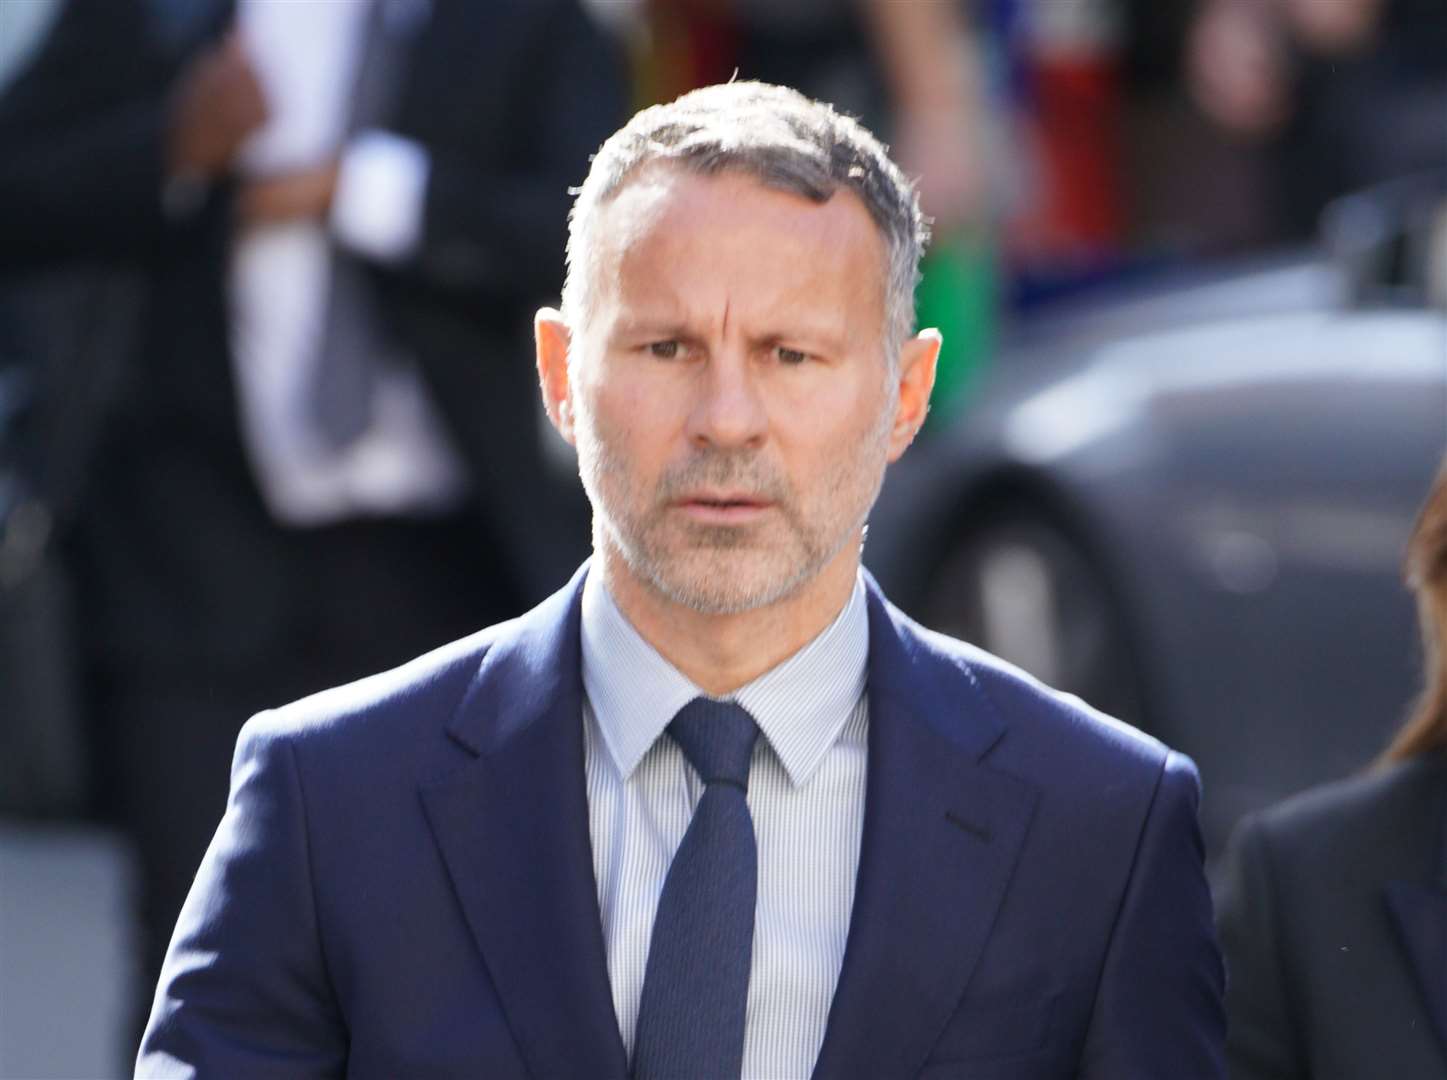 Ryan Giggs was excused attendance at court on Wednesday (Peter Byrne/PA)